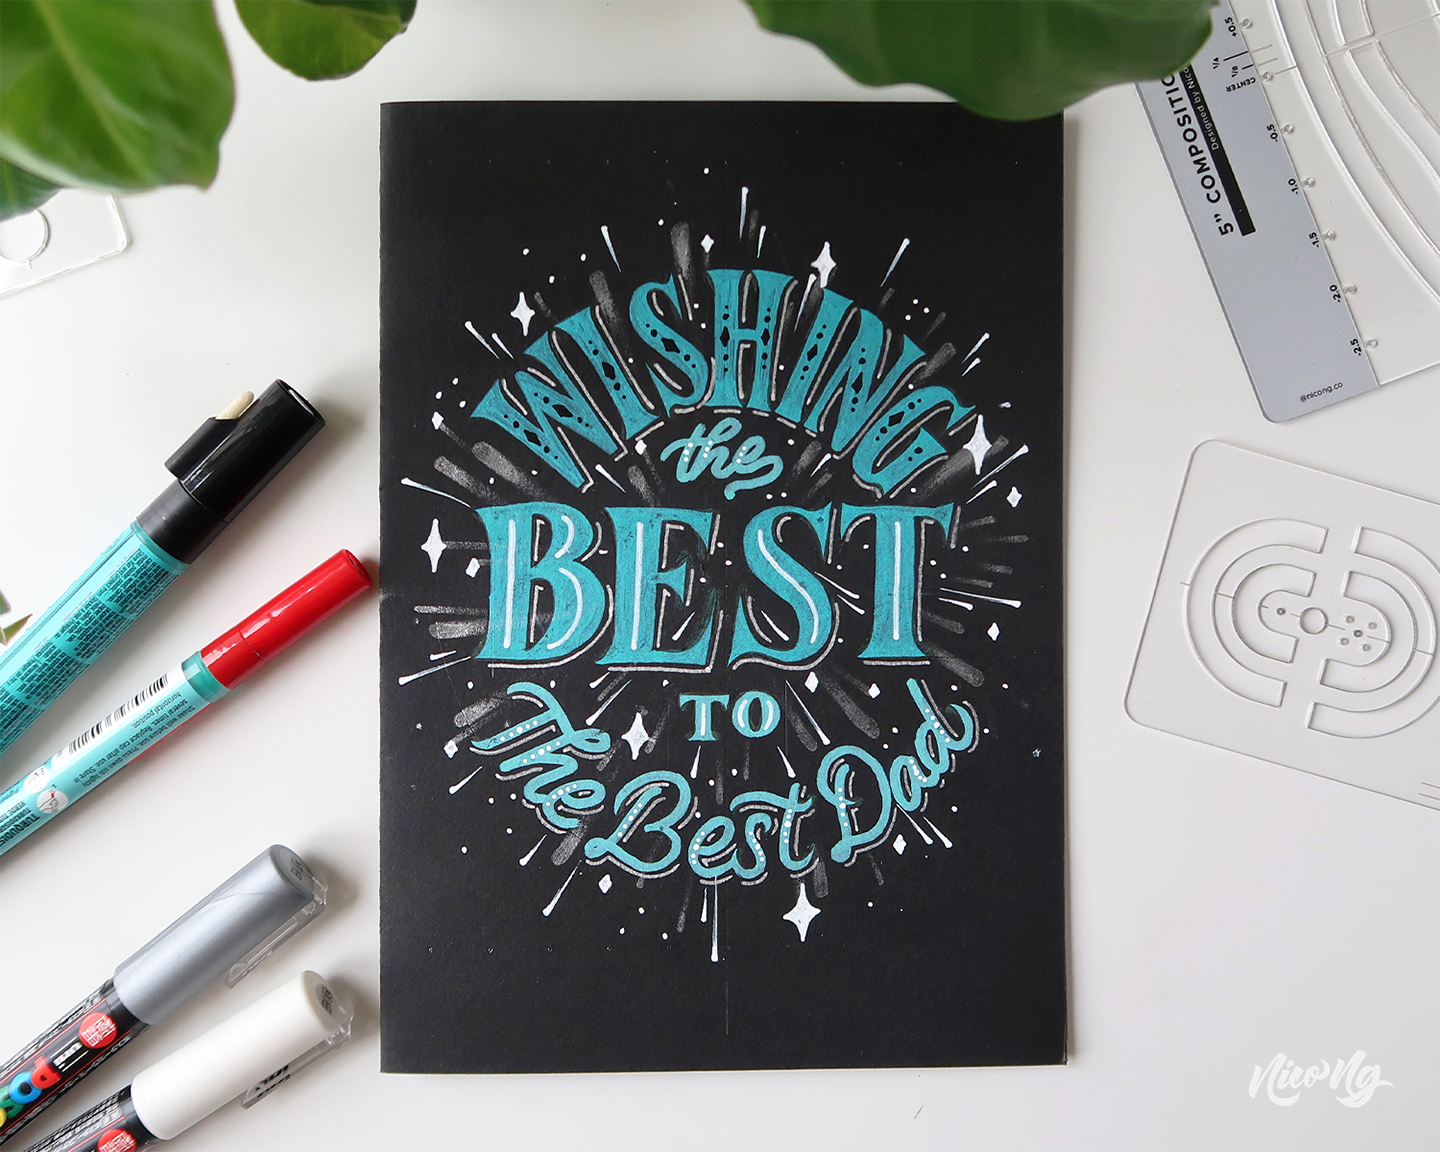 A Dazzling Handmade Father’s Day Card Tutorial by Nico Ng